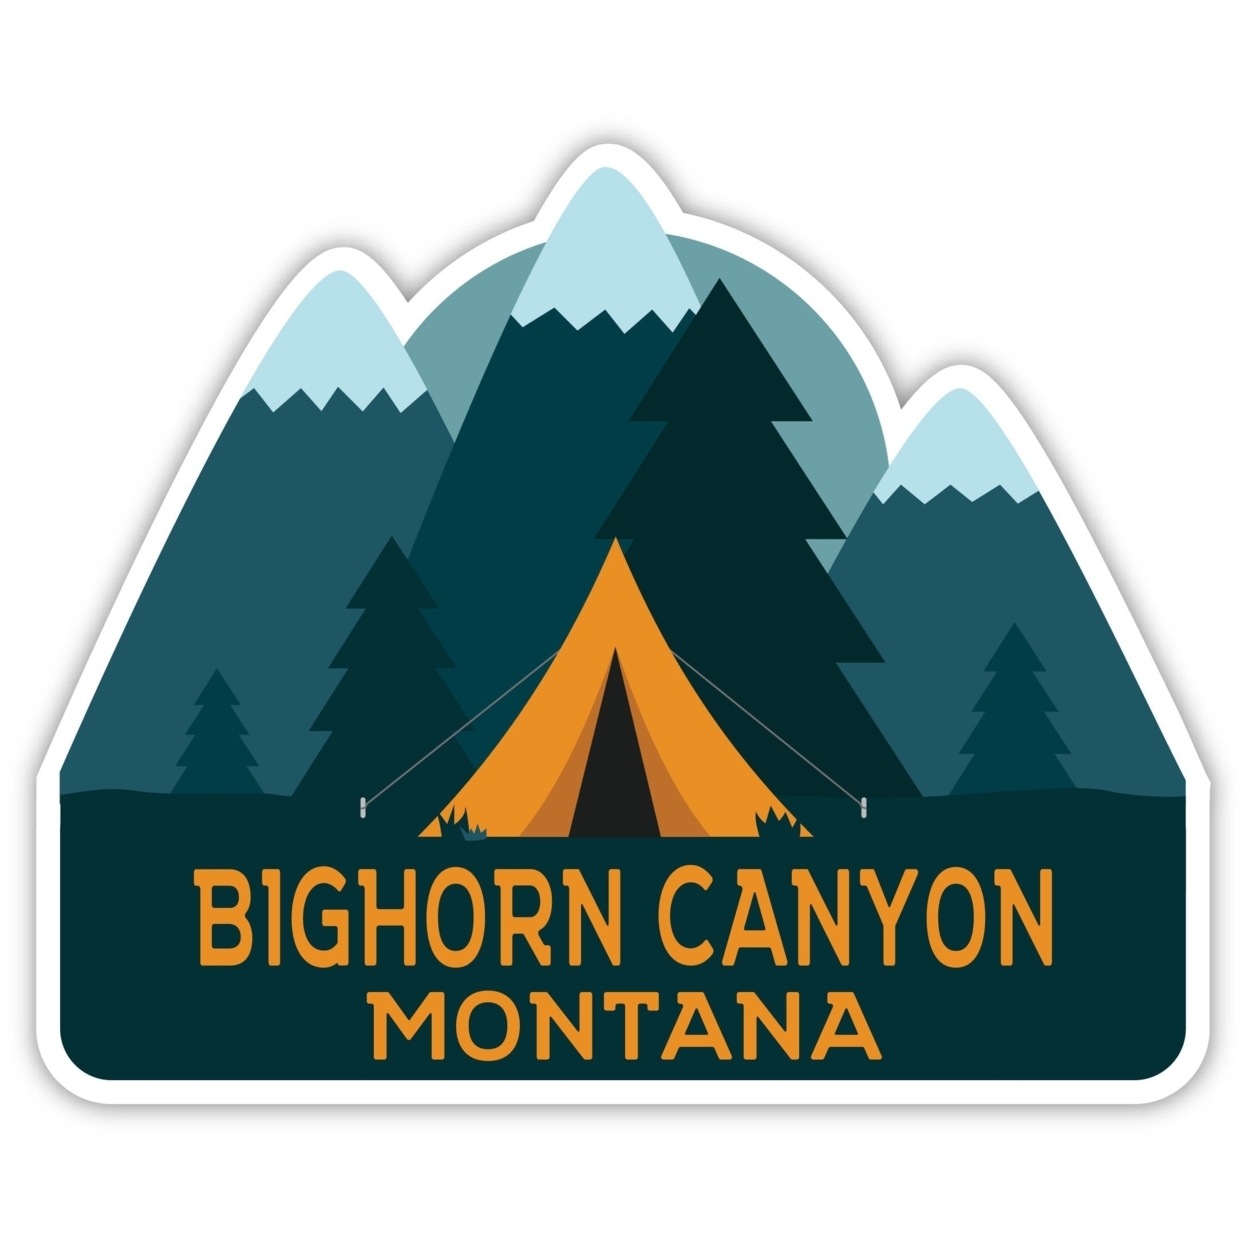 Bighorn Canyon Montana Souvenir Decorative Stickers (Choose Theme And Size) - 4-Pack, 6-Inch, Tent